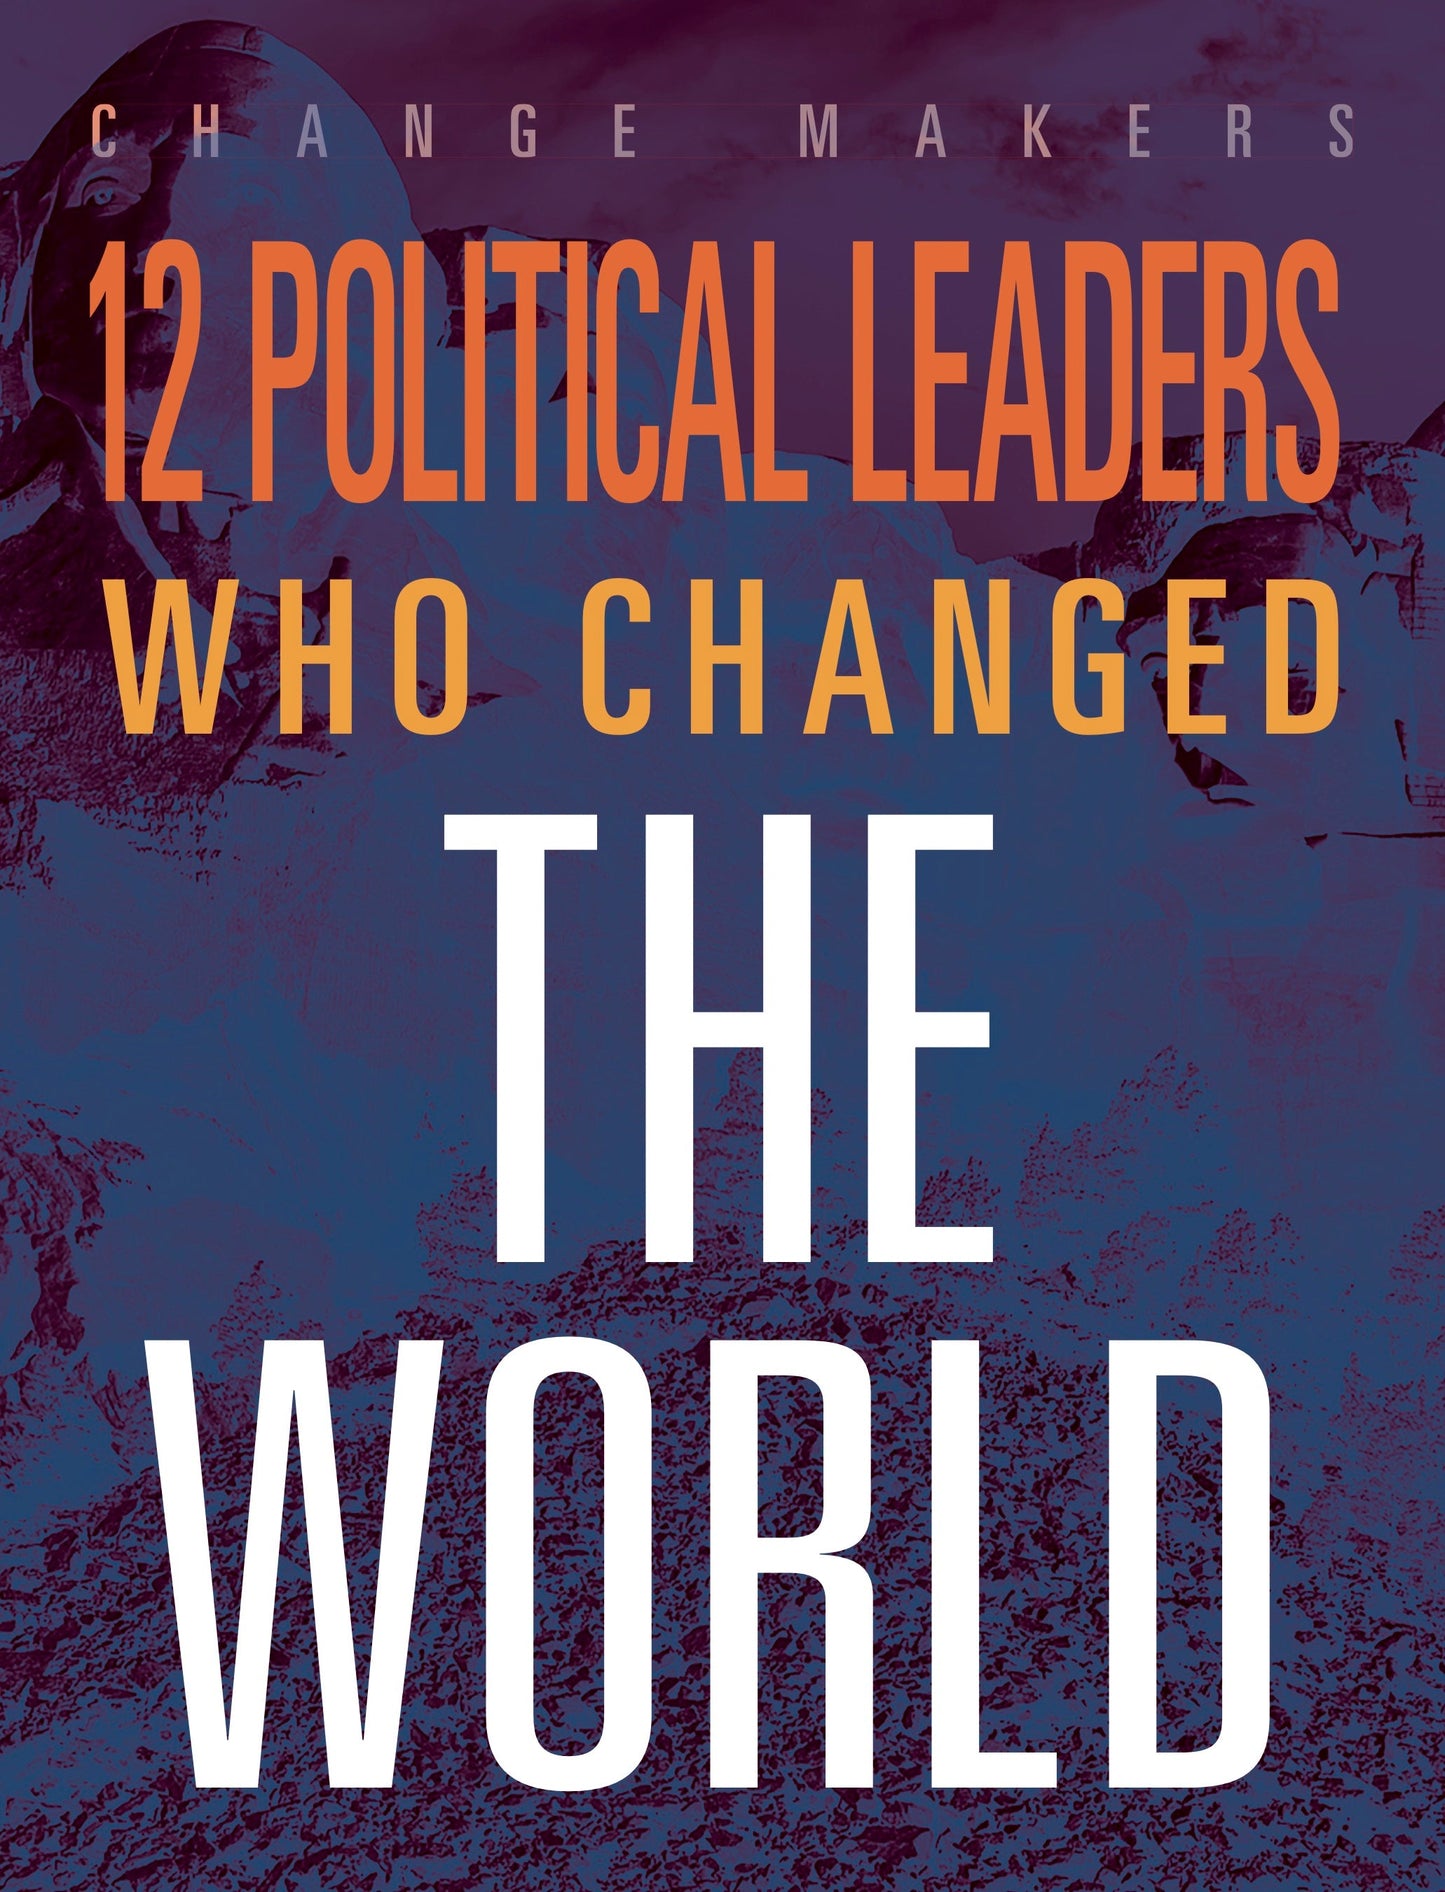 Change Makers: 12 Political Leaders Who Changed the World